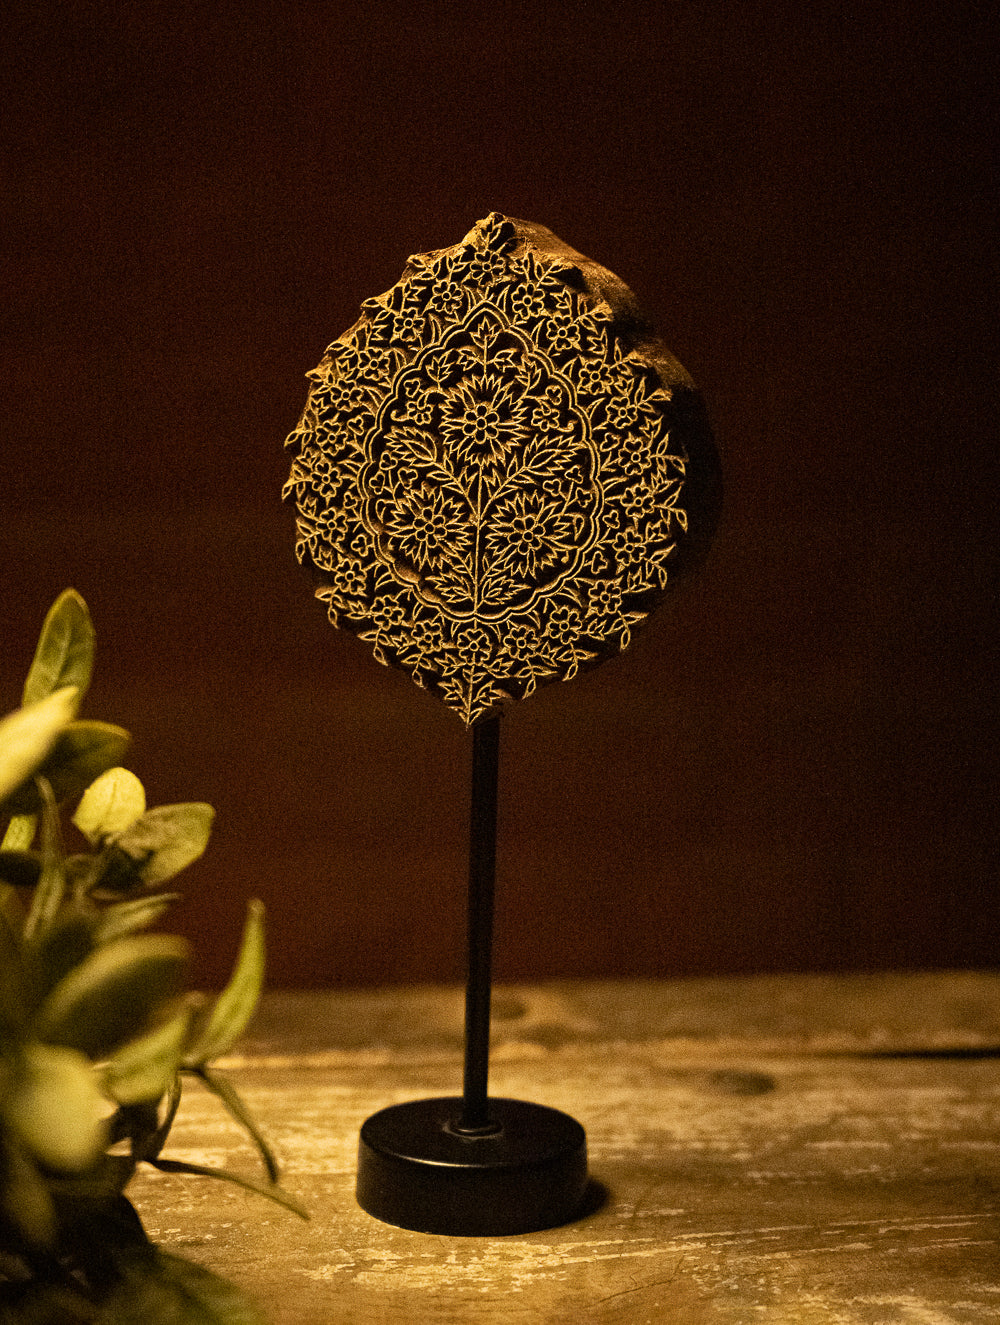 Load image into Gallery viewer, Nazakat. Exclusive, Fine Hand Engraved Wood Block Curio - Floral Ornate